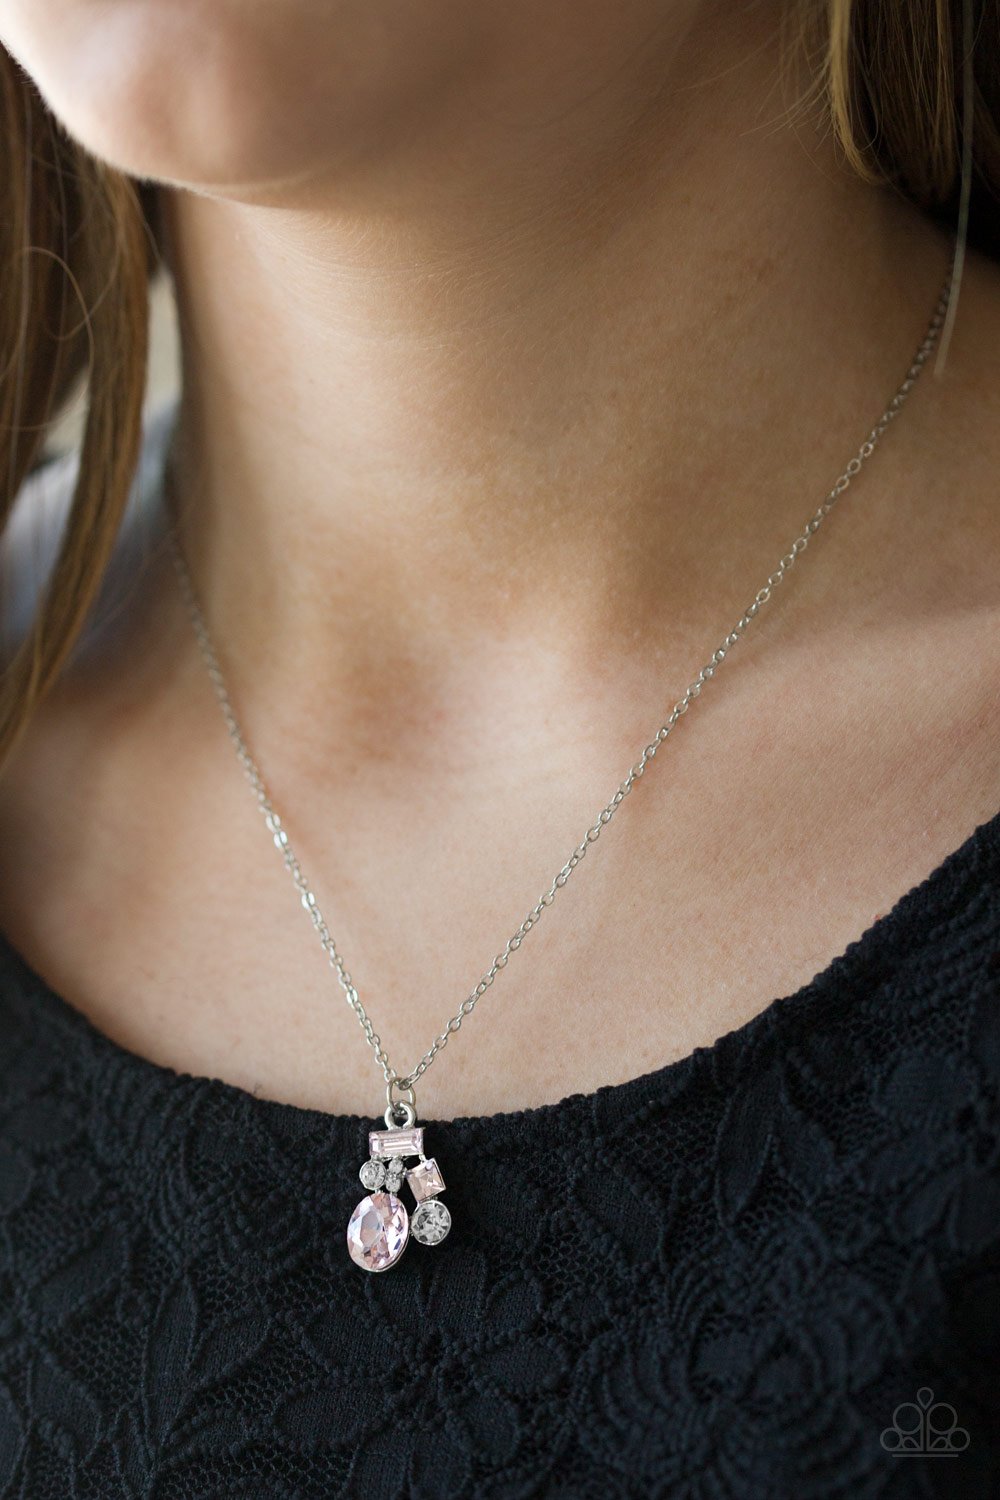 Time to Be Timeless - pink necklace